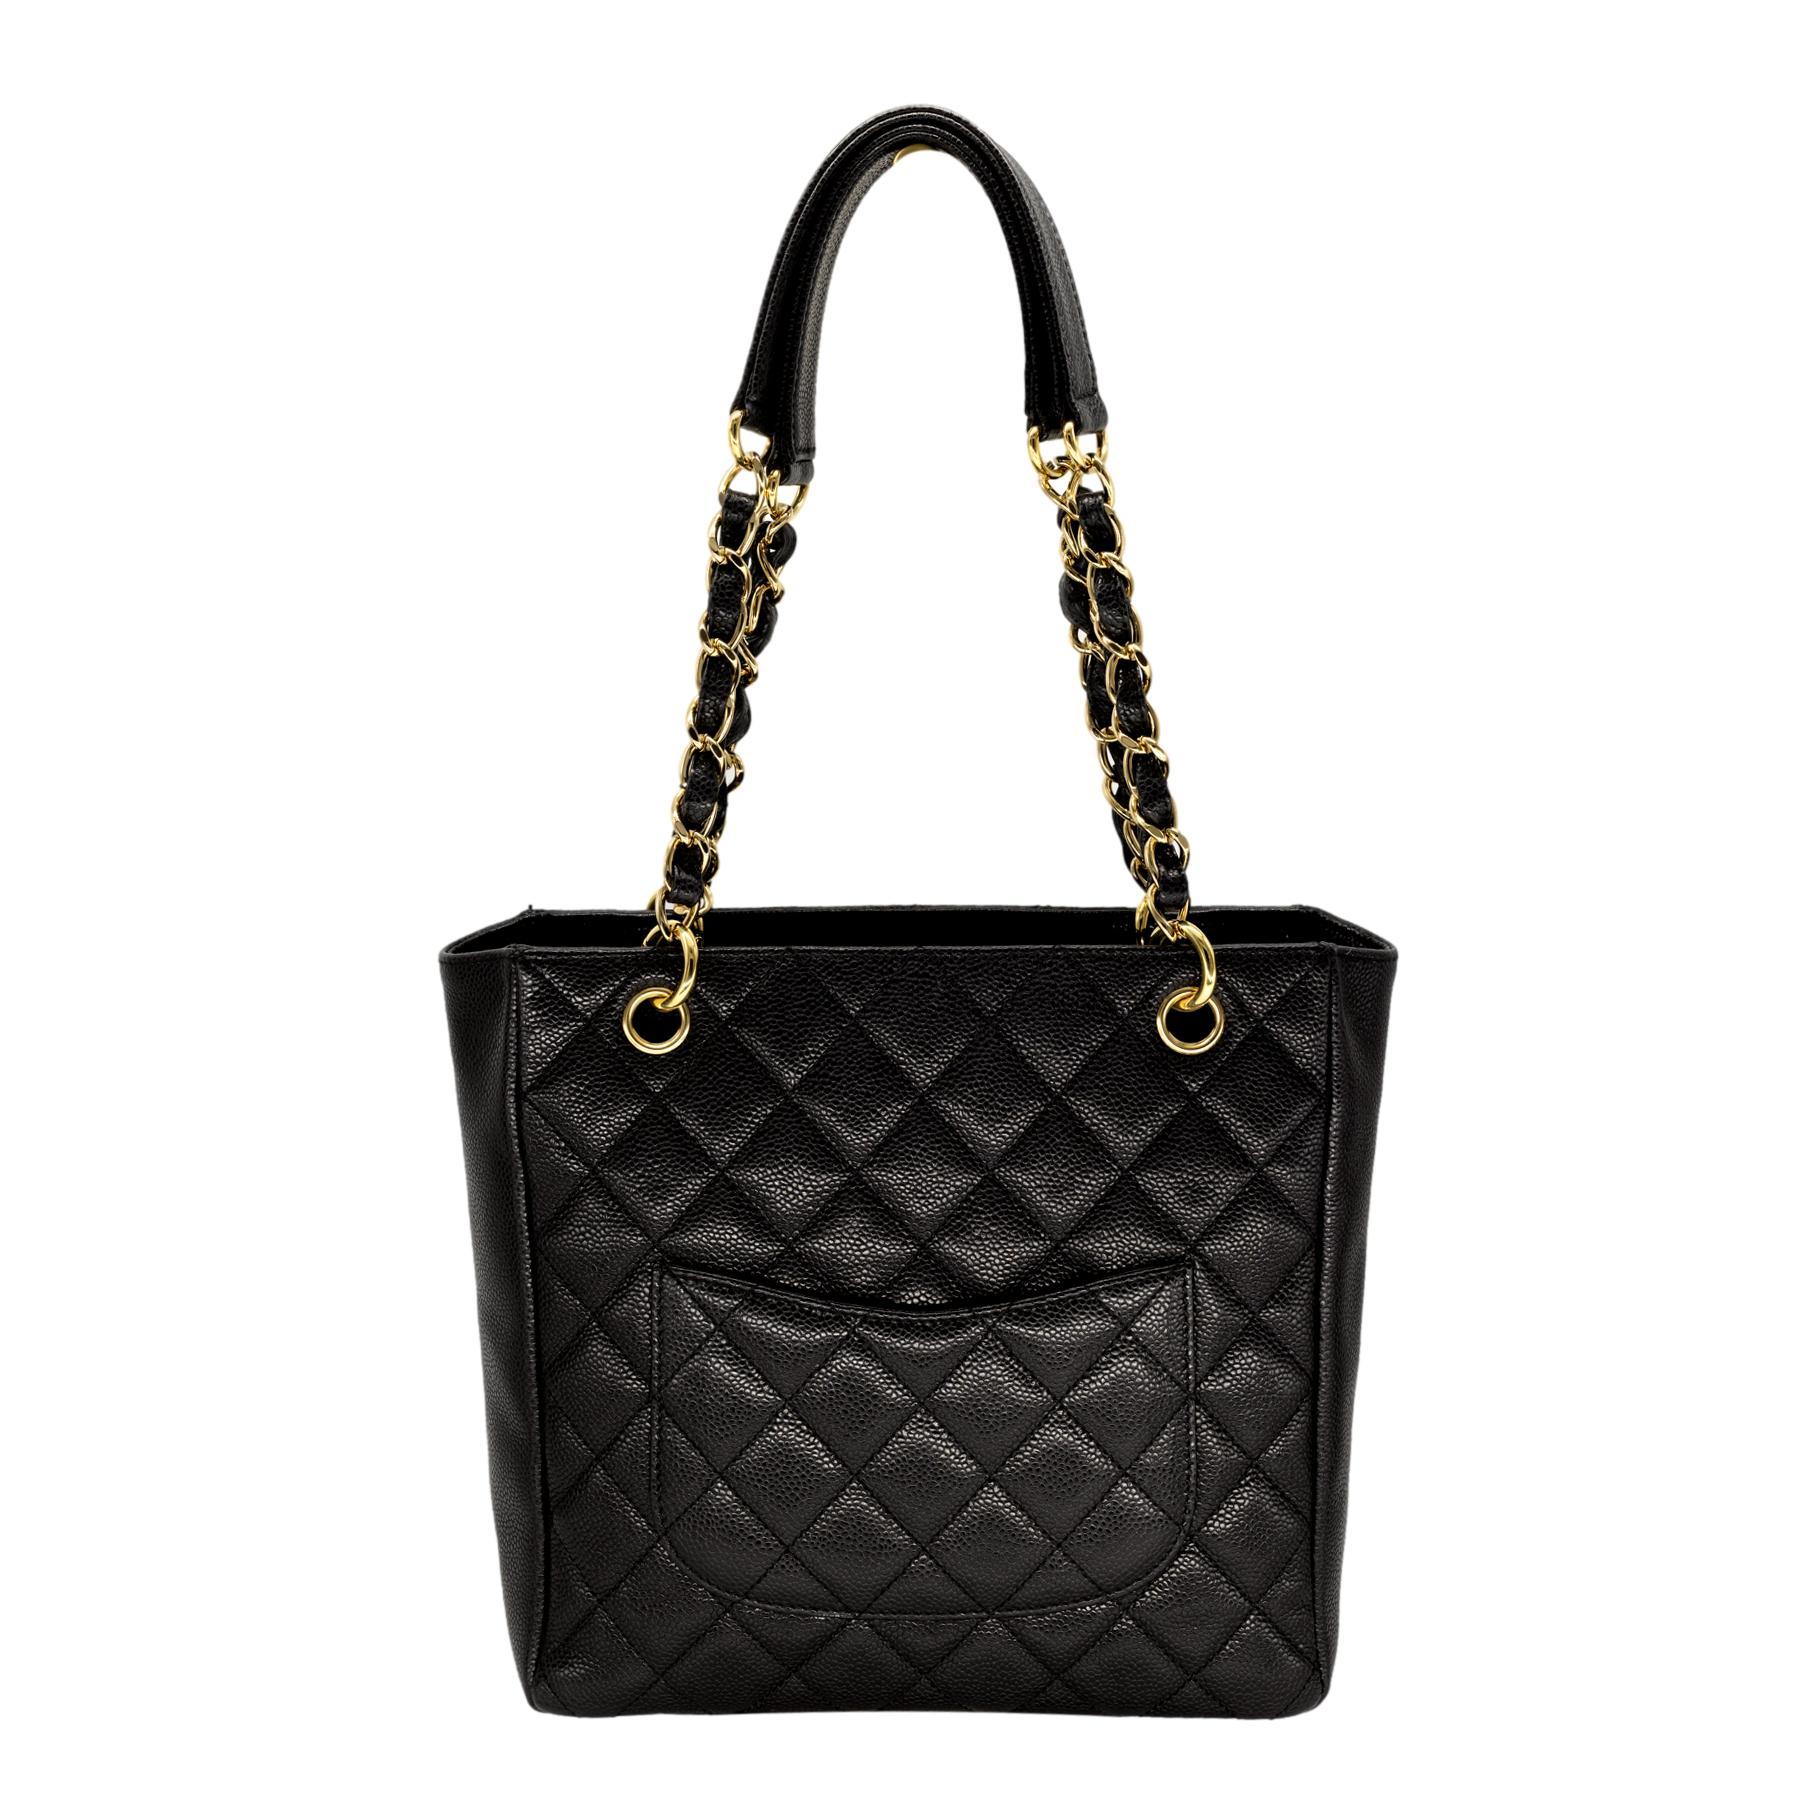 Women's or Men's Chanel Black Quilted Caviar Petite Shopping Top Handle Tote Bag, 2008.